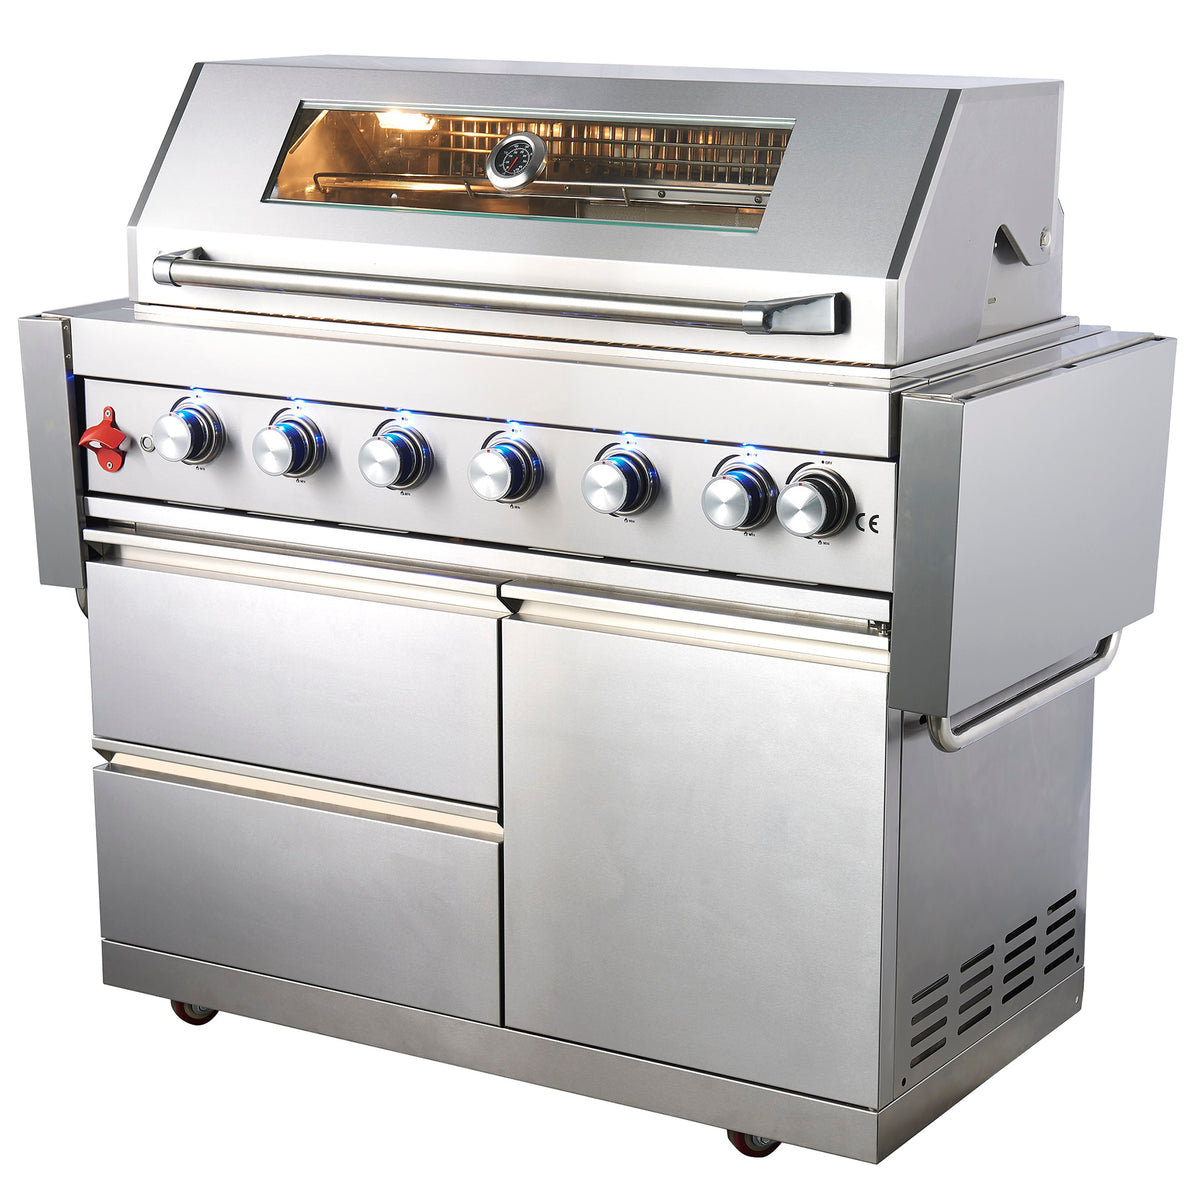 Draco Grills Z640 Deluxe 6 Burner Stainless Steel Gas Barbecue with Sear Station